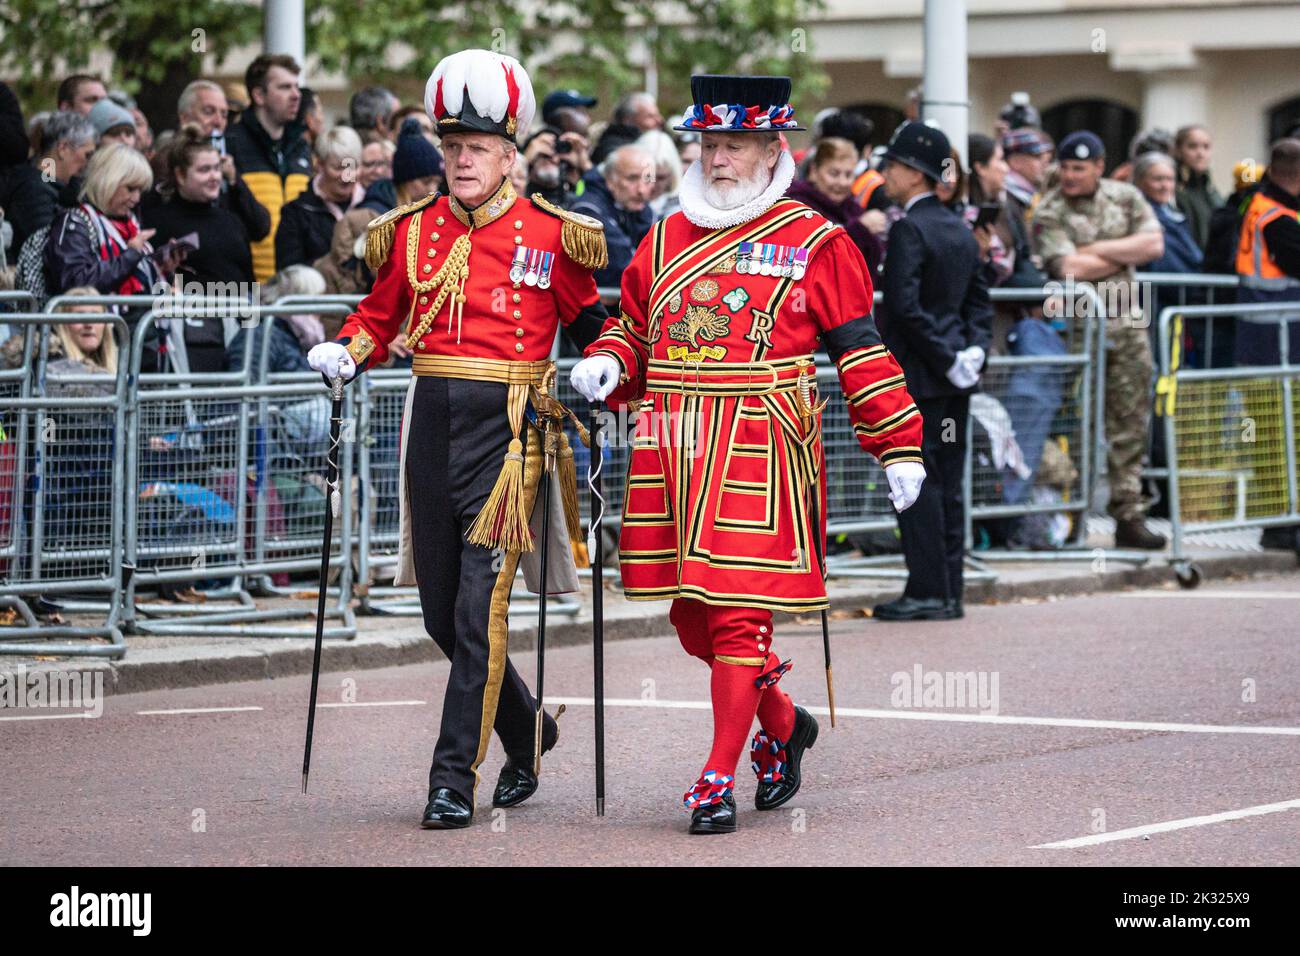 A Yeoman Warder walks on the road at the Queen Elizabeth II funeral procession in London following the Queen's death, England, United Kingdom Stock Photo